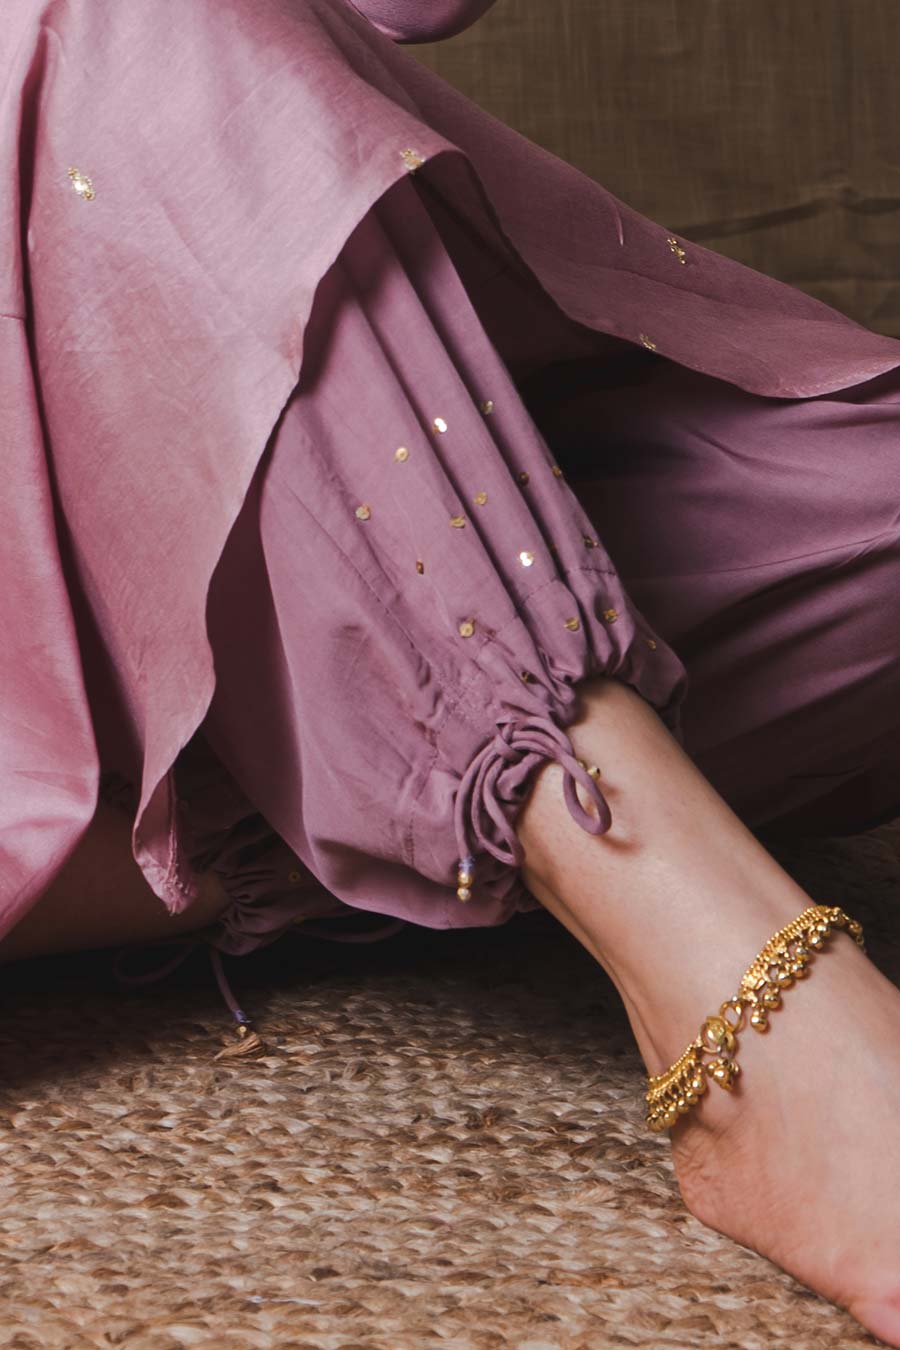 Mauve Embroidered Pull String Pants